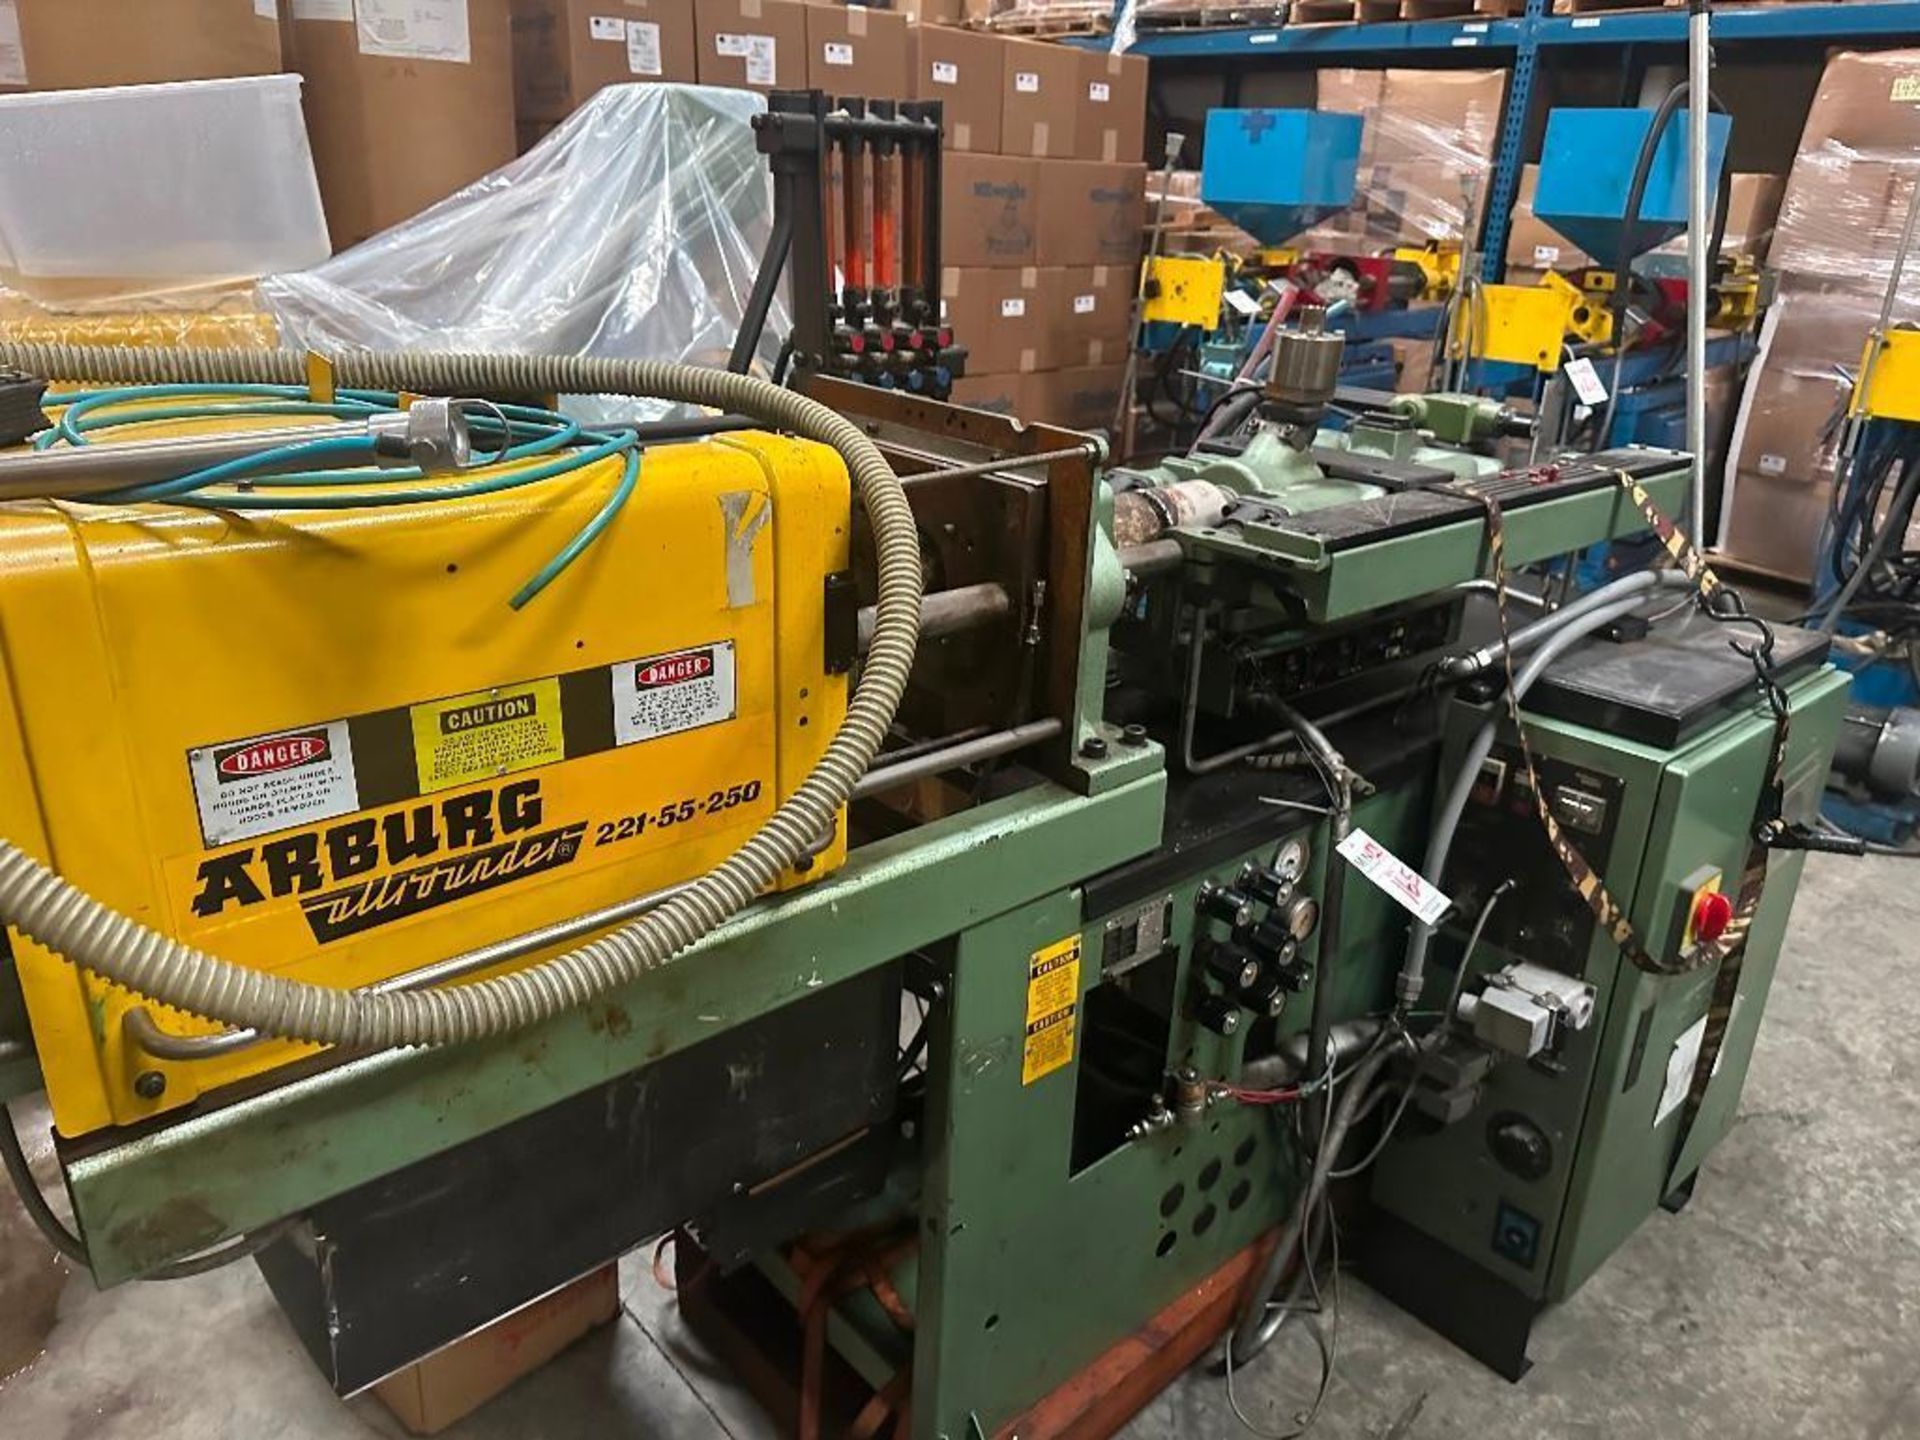 Arburg Allrounder 221-55-250 Plastic Injection Molding Machine *PARTS ONLY*